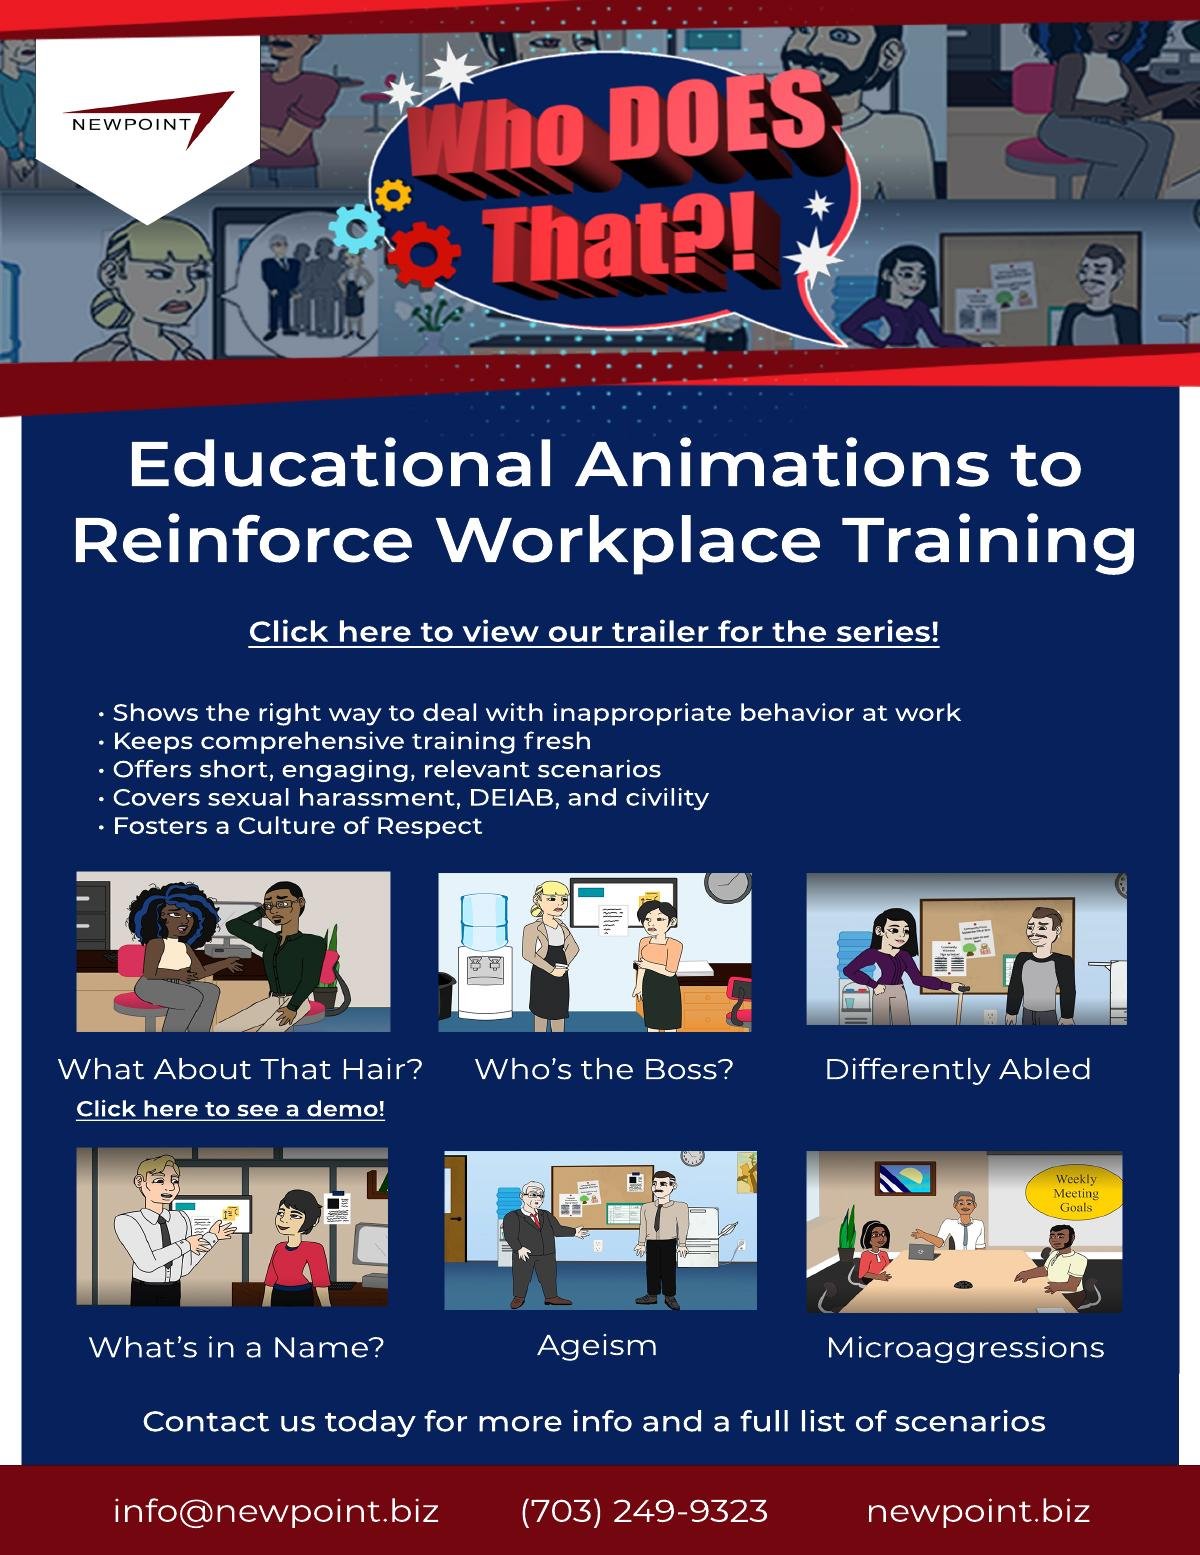 Educational Animations Reinforce Workplace Training on Diversity, Equity and Inclusion